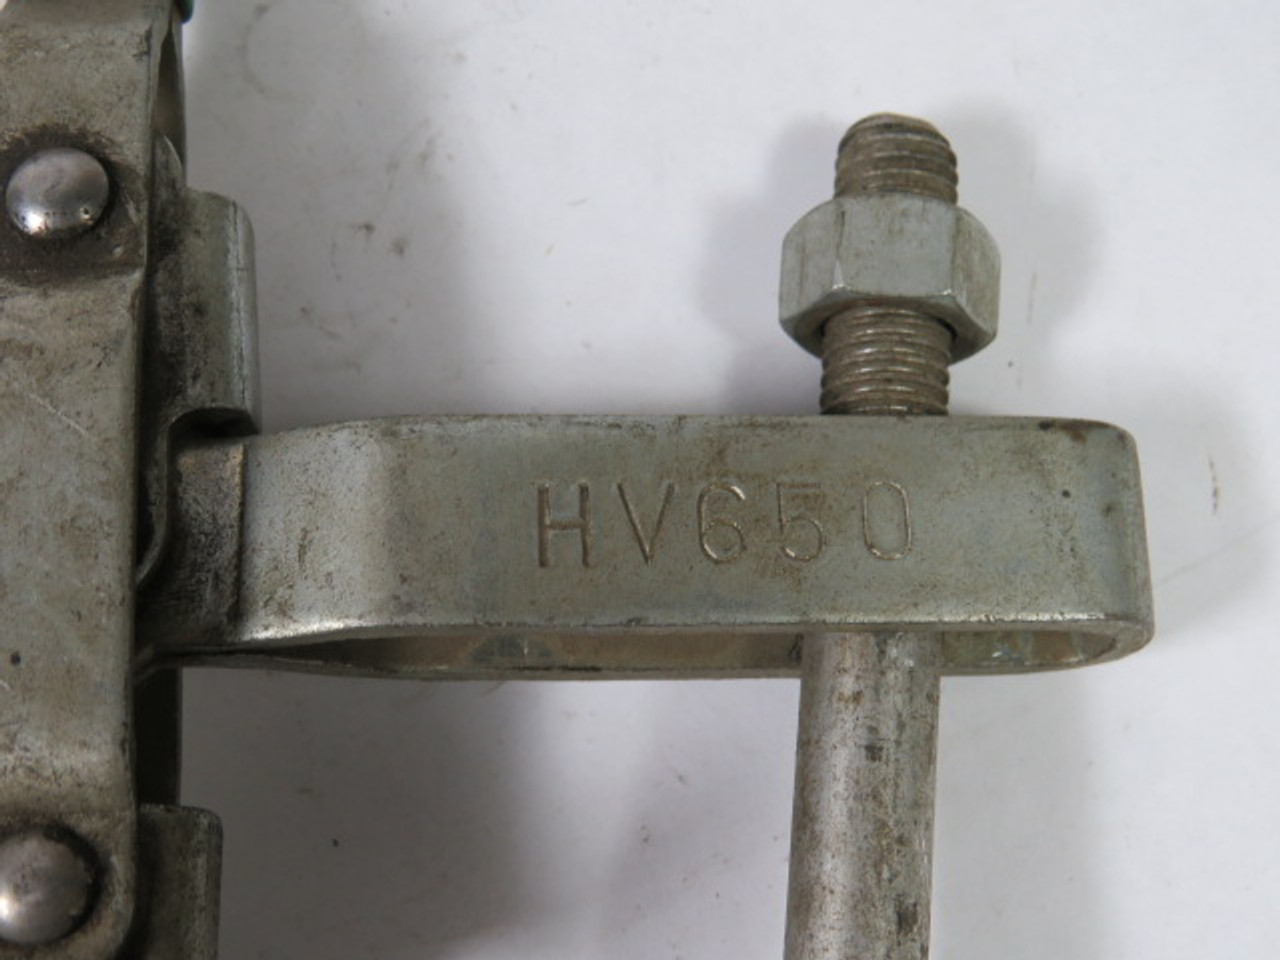 Jay-Bee HV650 Toggle Clamp USED